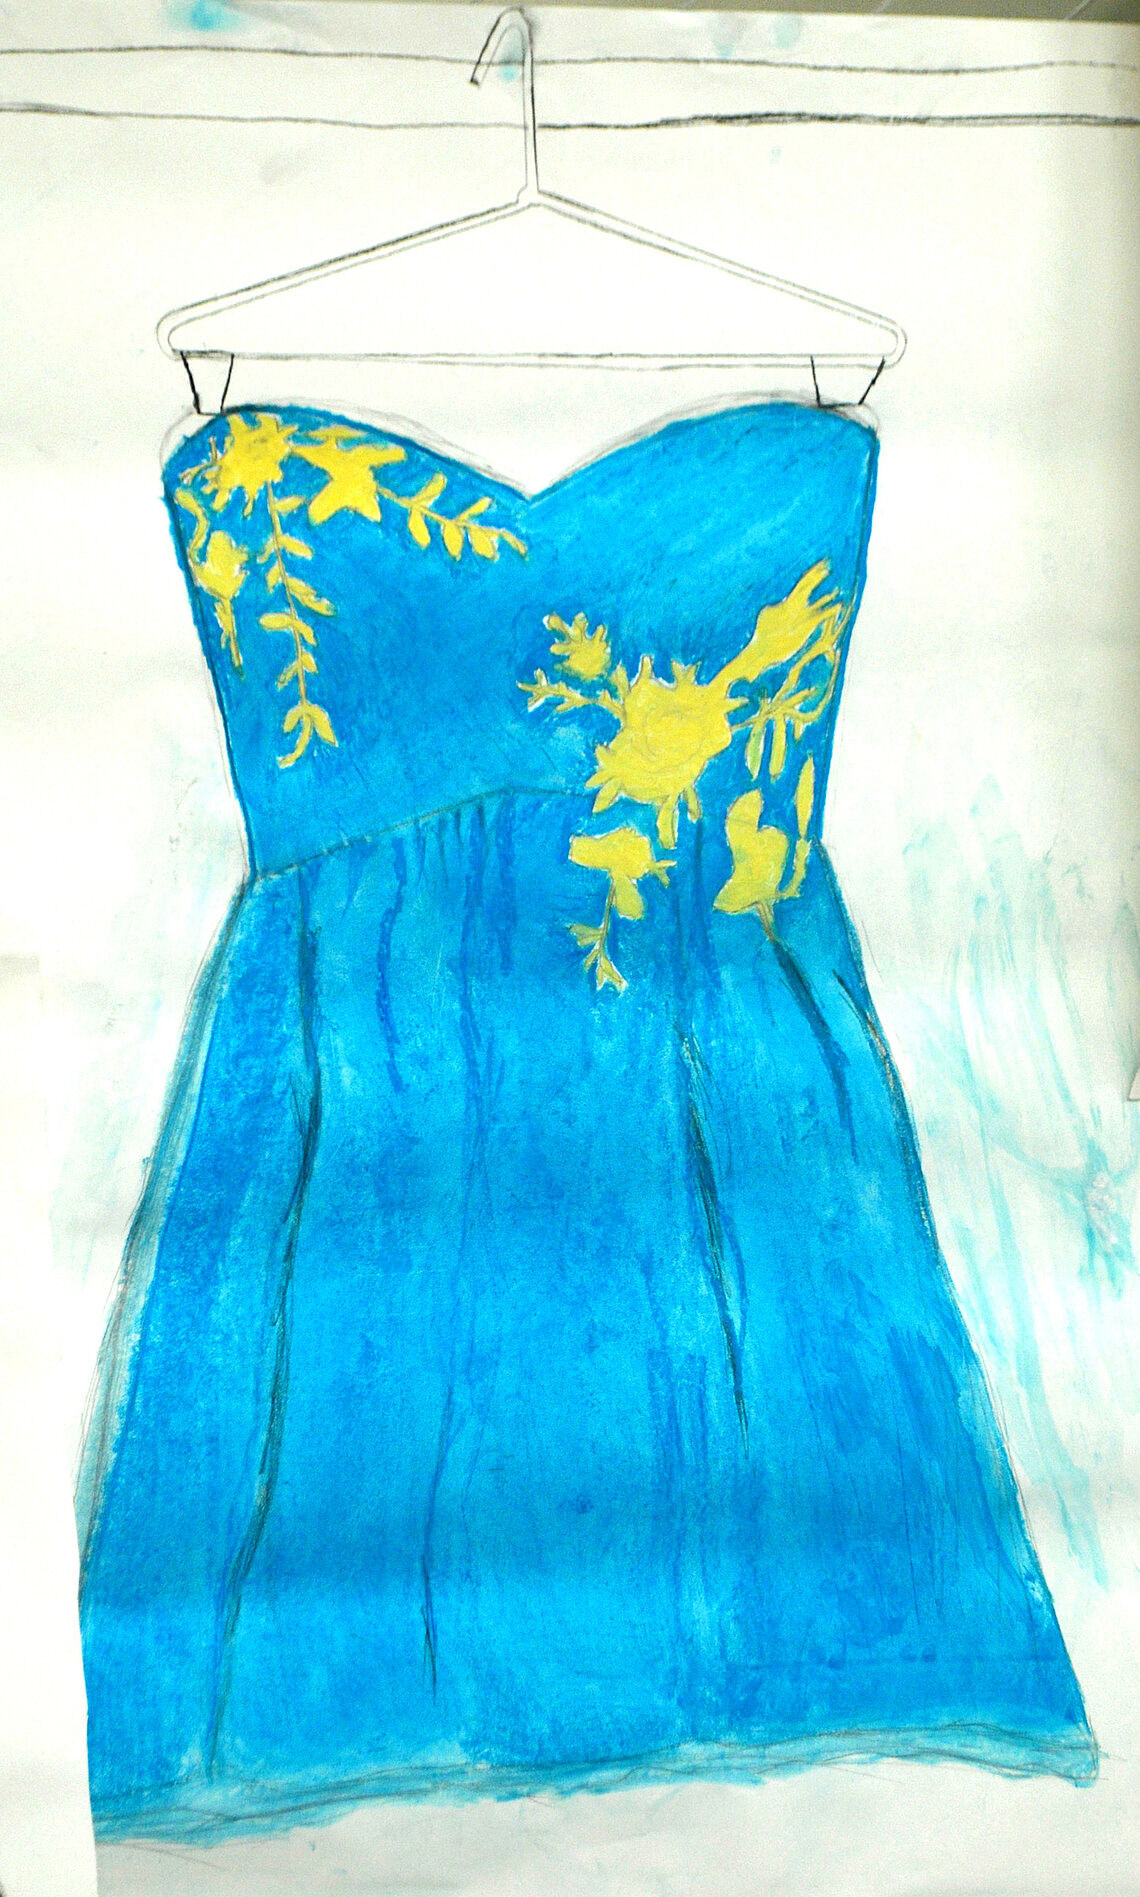 Drawing of a blue dress with yellow patterns on it.